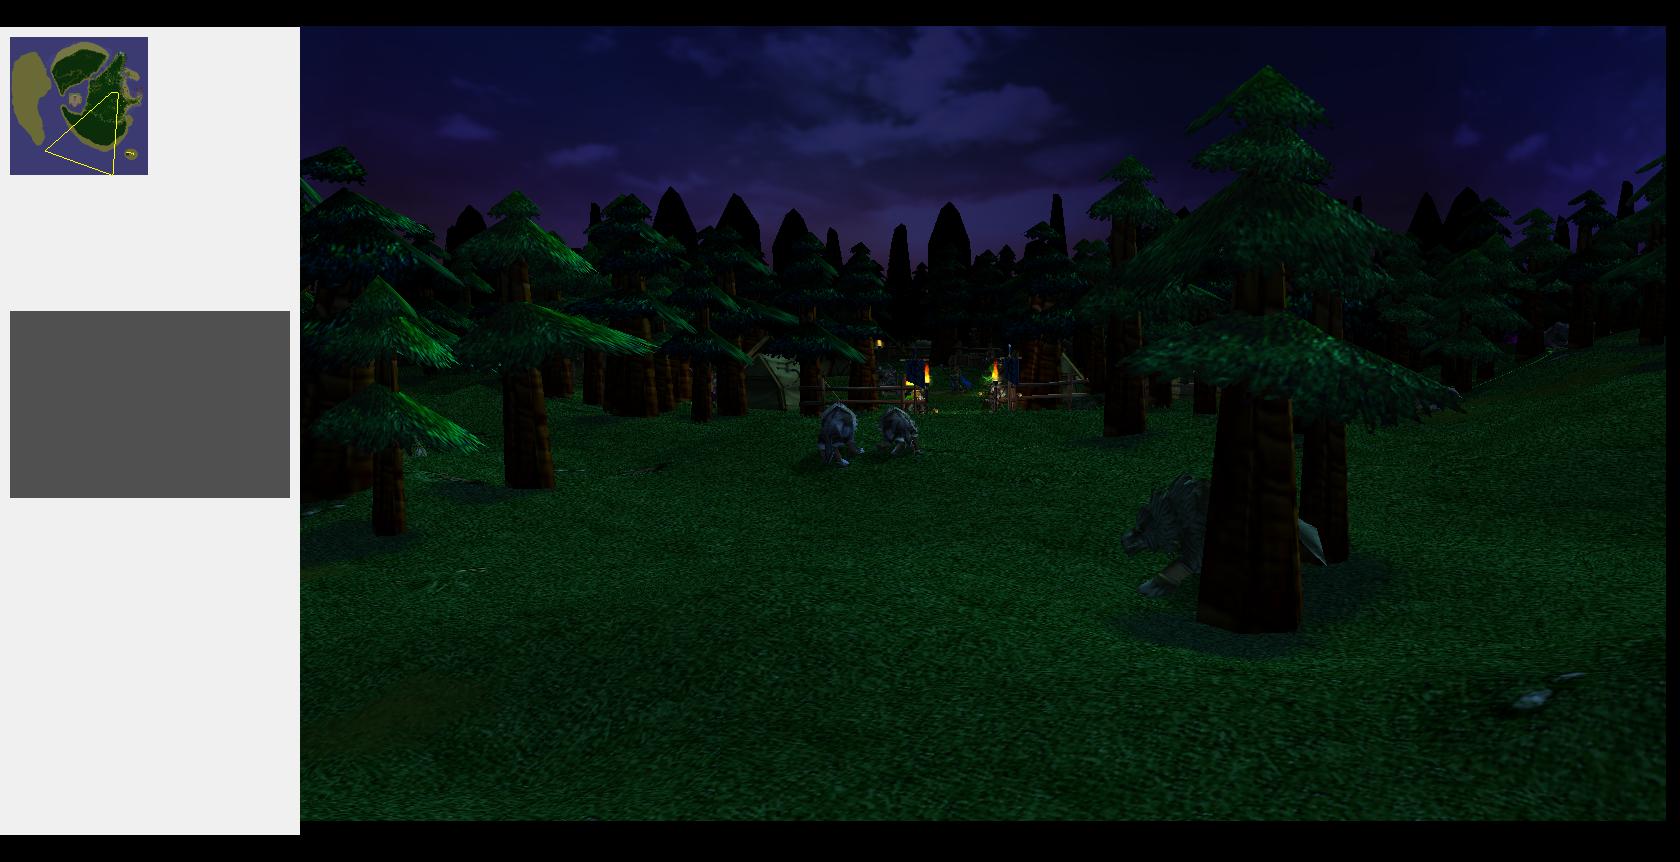 Nighttime at the woods, and the ranger's outpost in the distance.